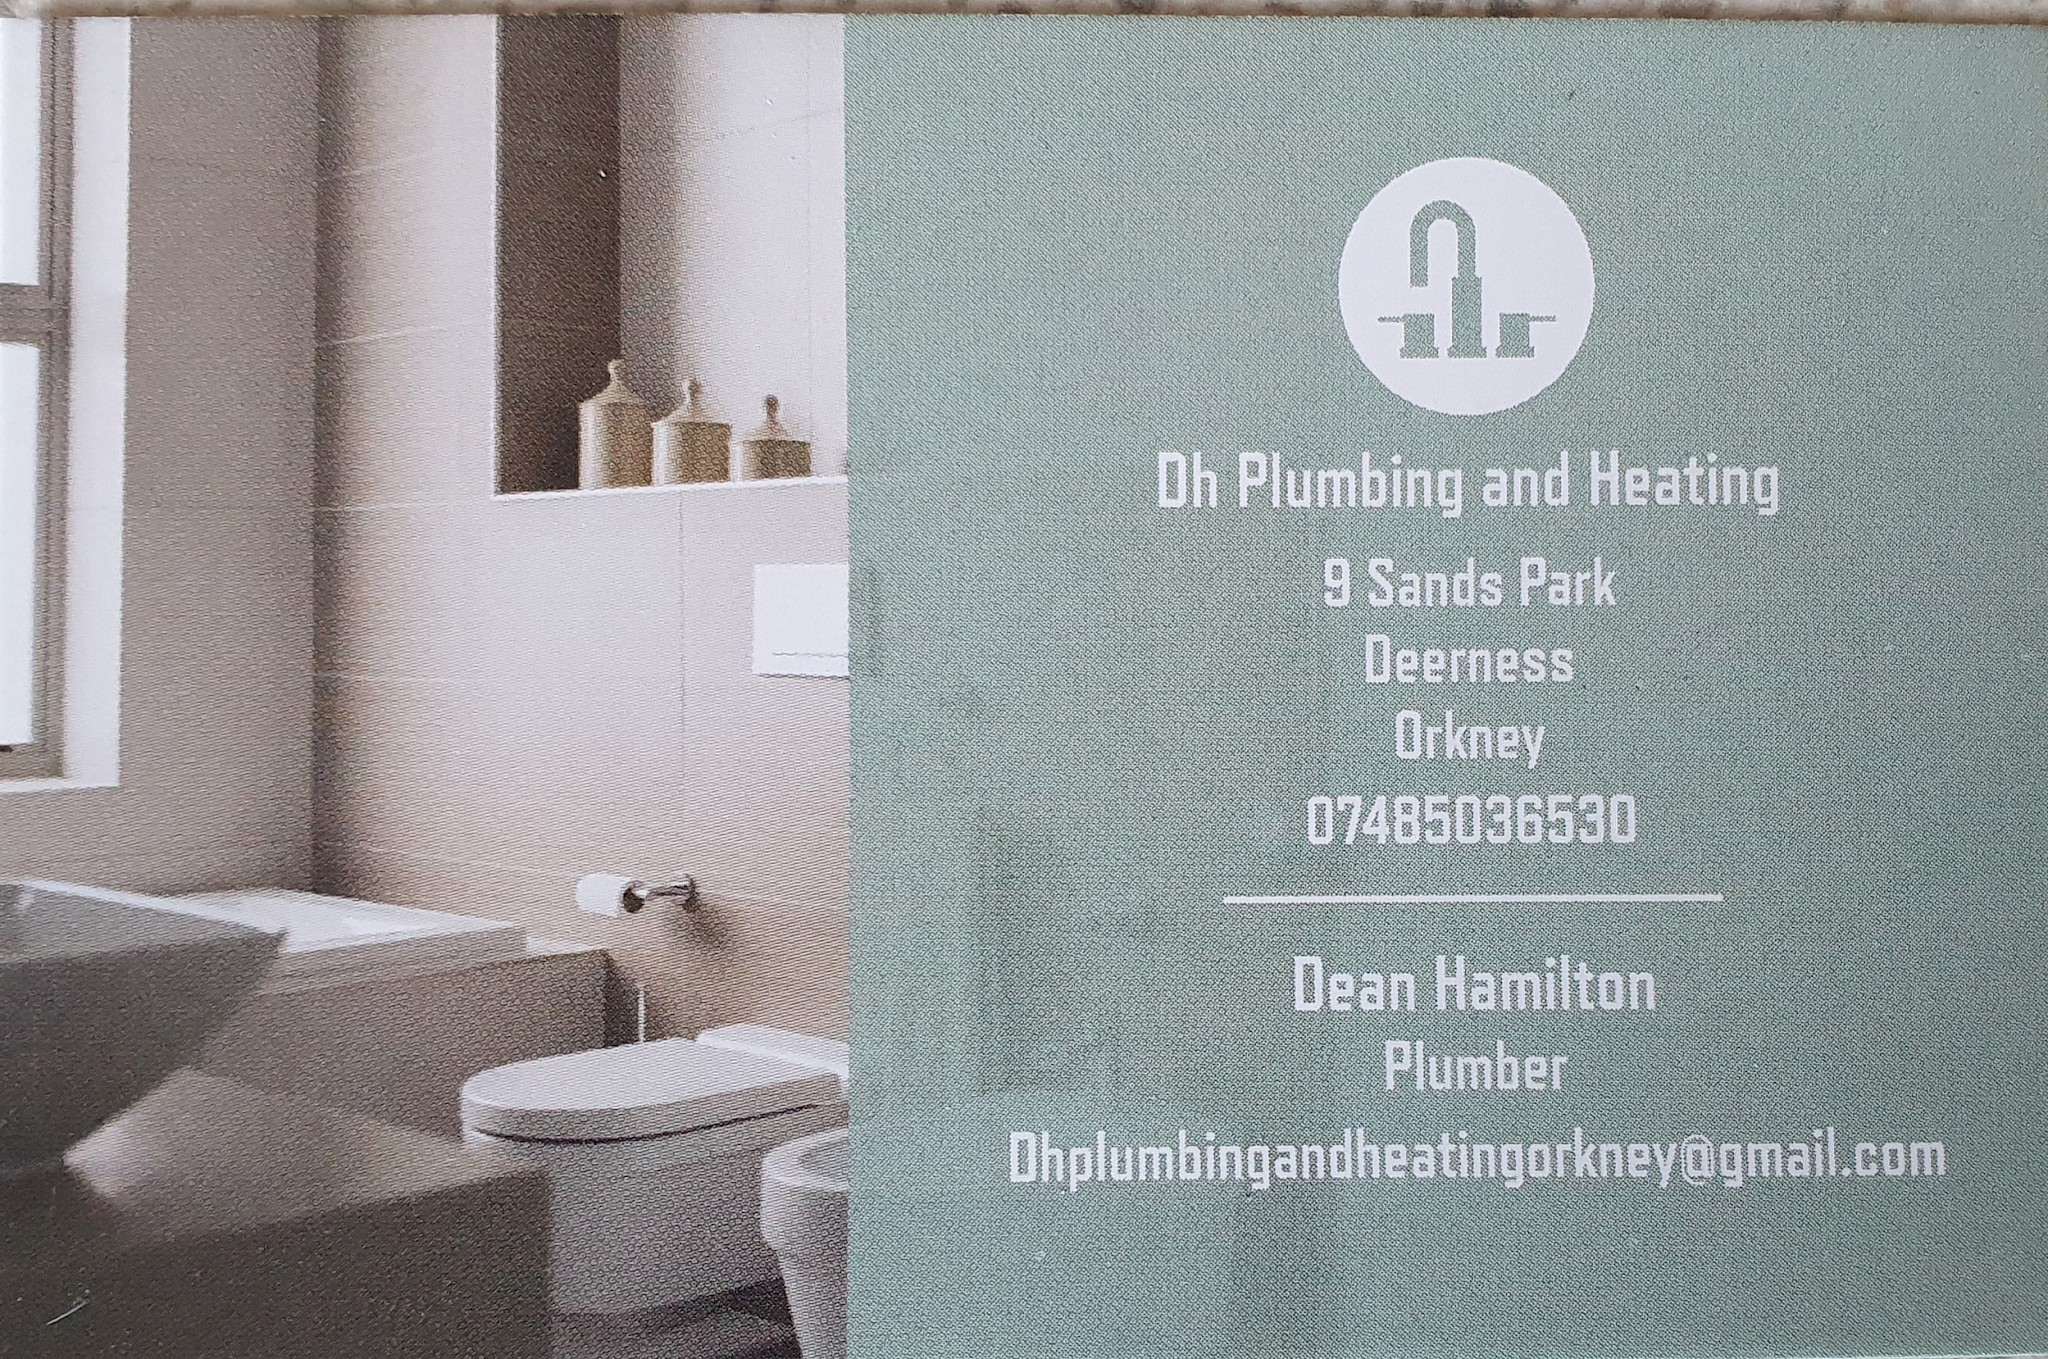 Dh Plumbing and Heating orkney Logo